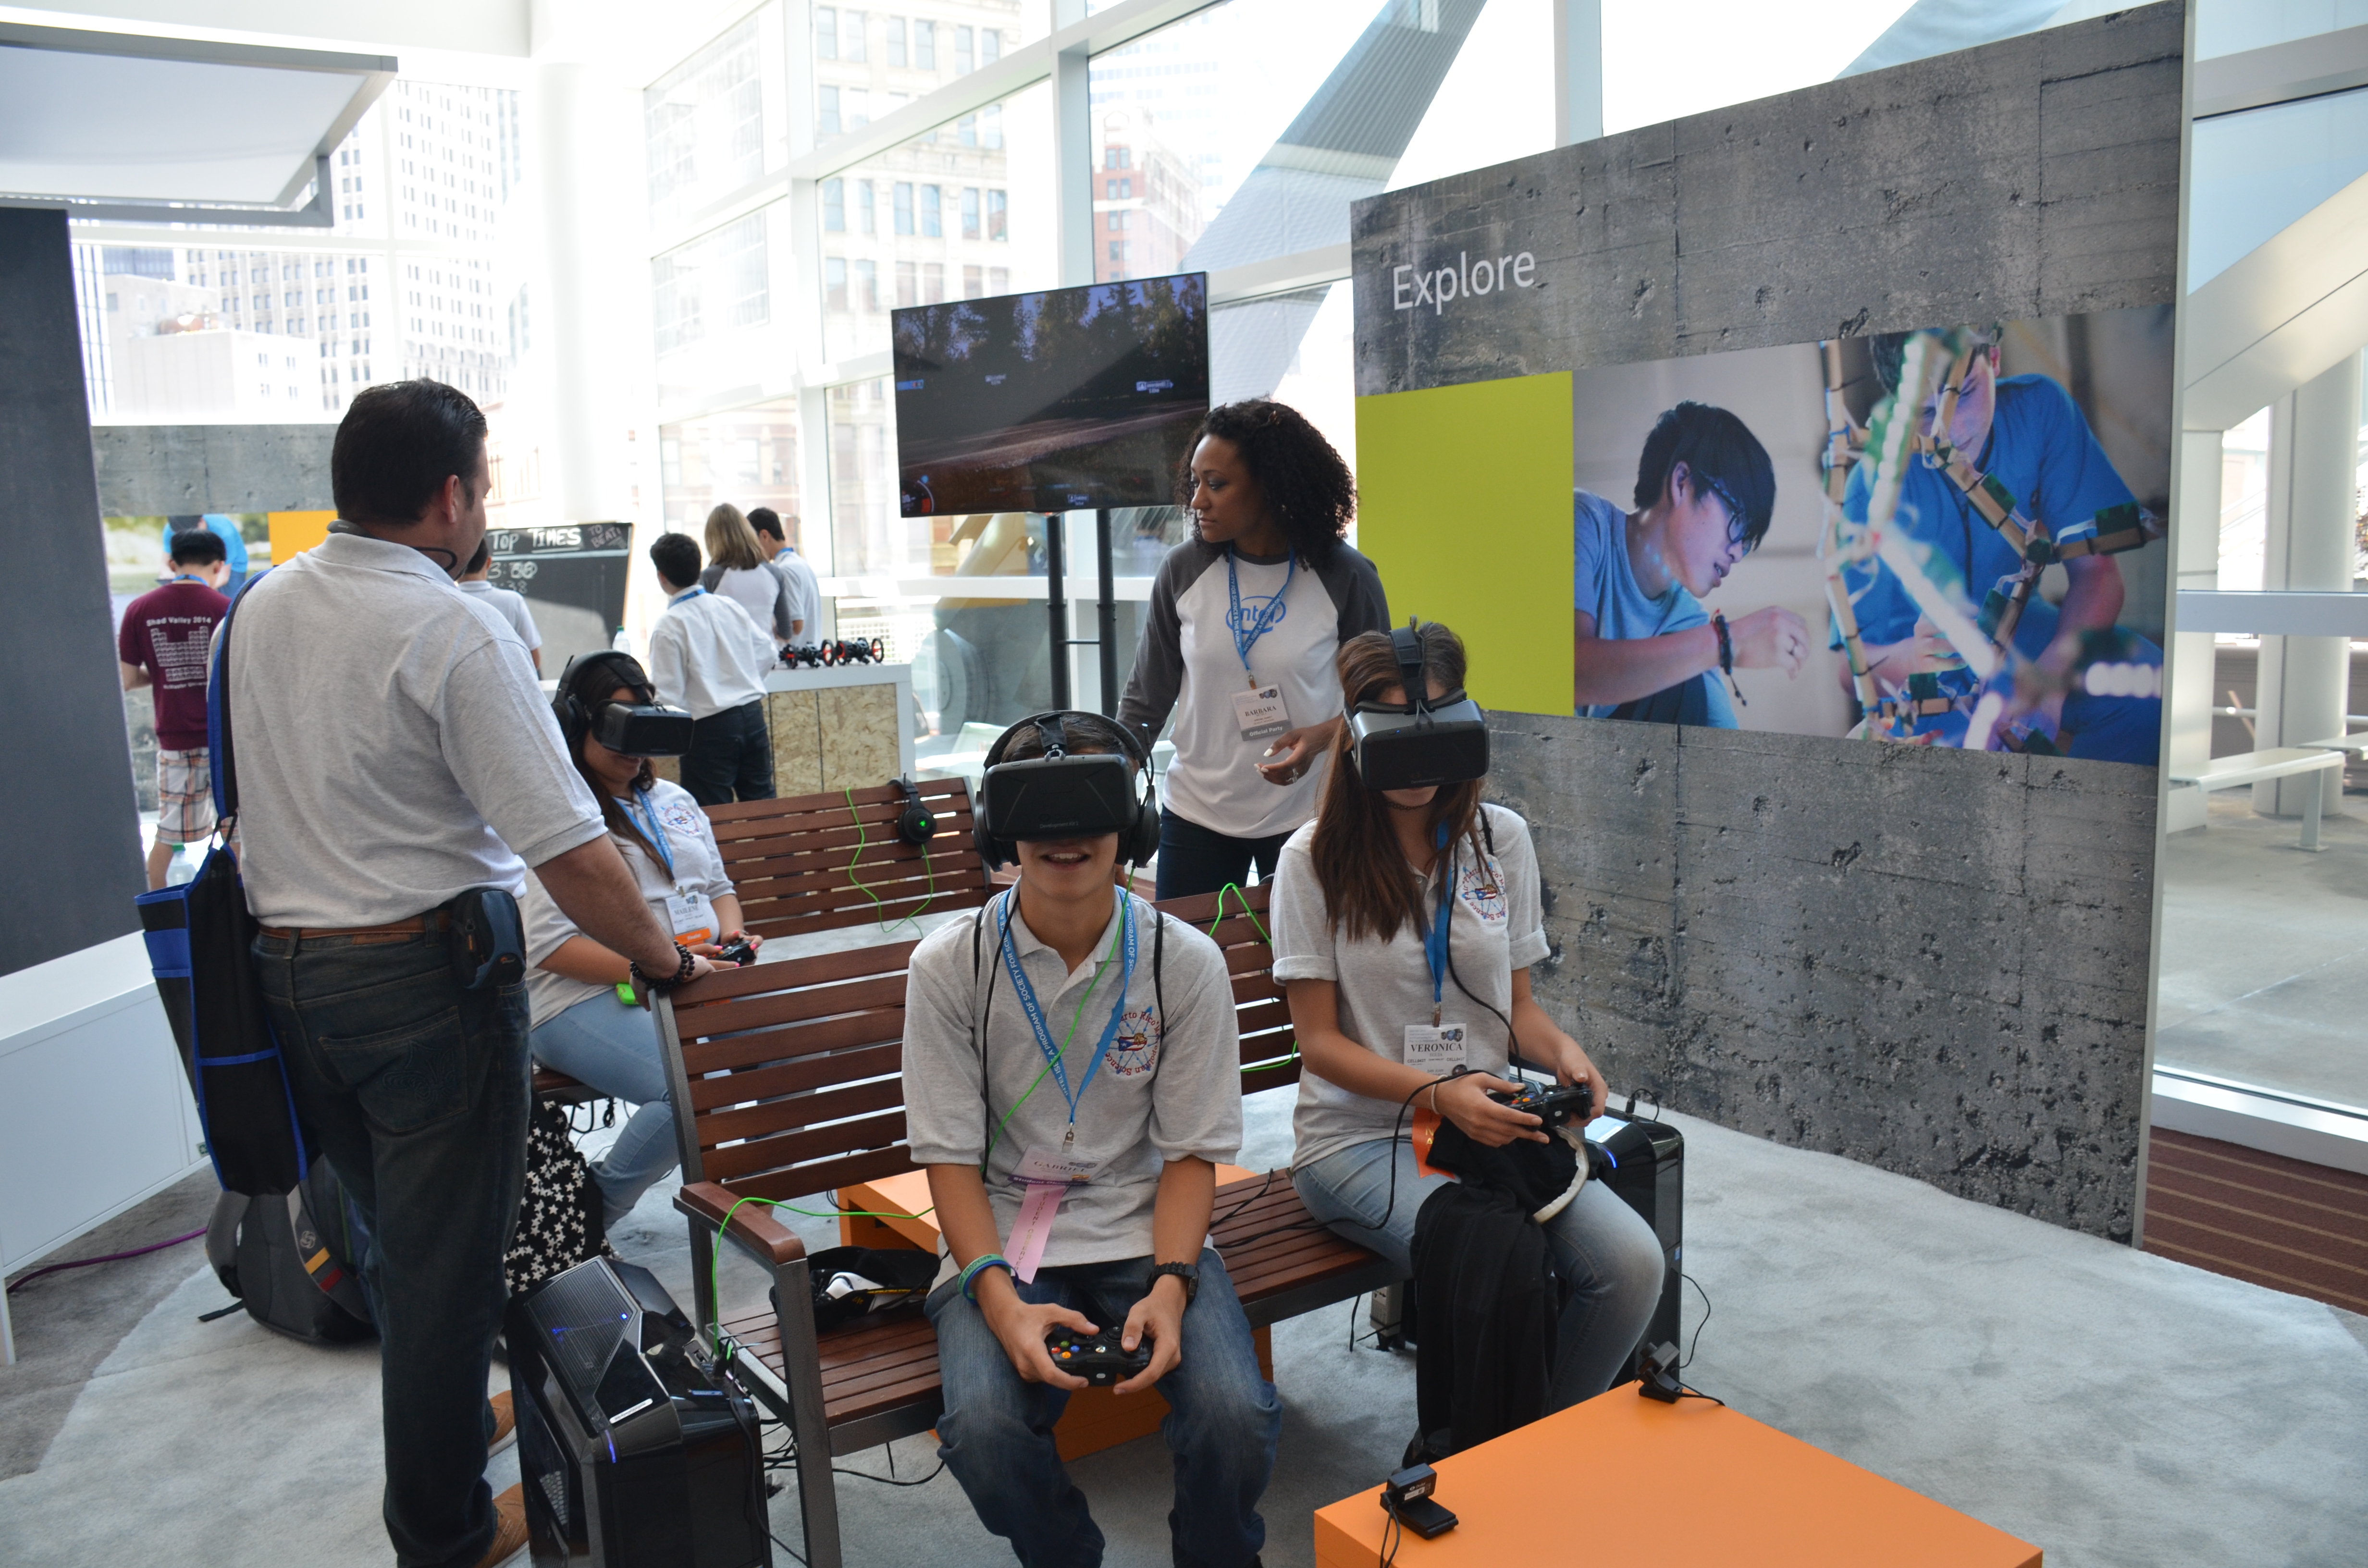 The Intel Quad kept many Intel ISEF finalists entertained during their free time.